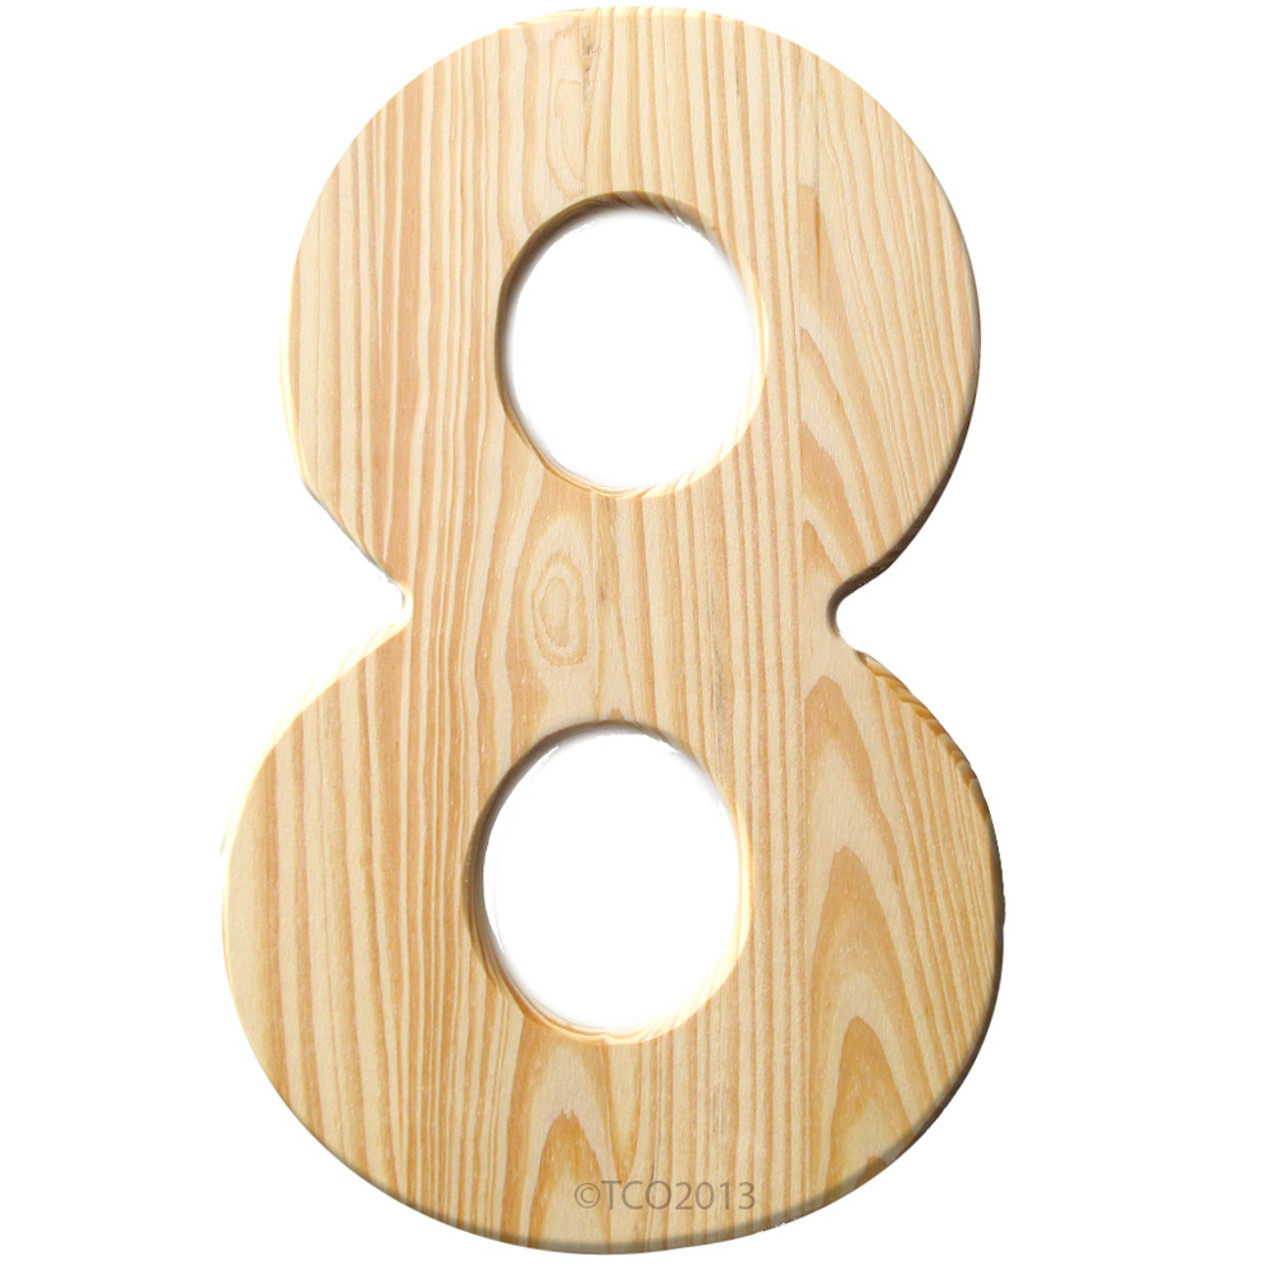 Unfinished Wood 12 In 2 In Thick Number Number 8 Crafts Outlet